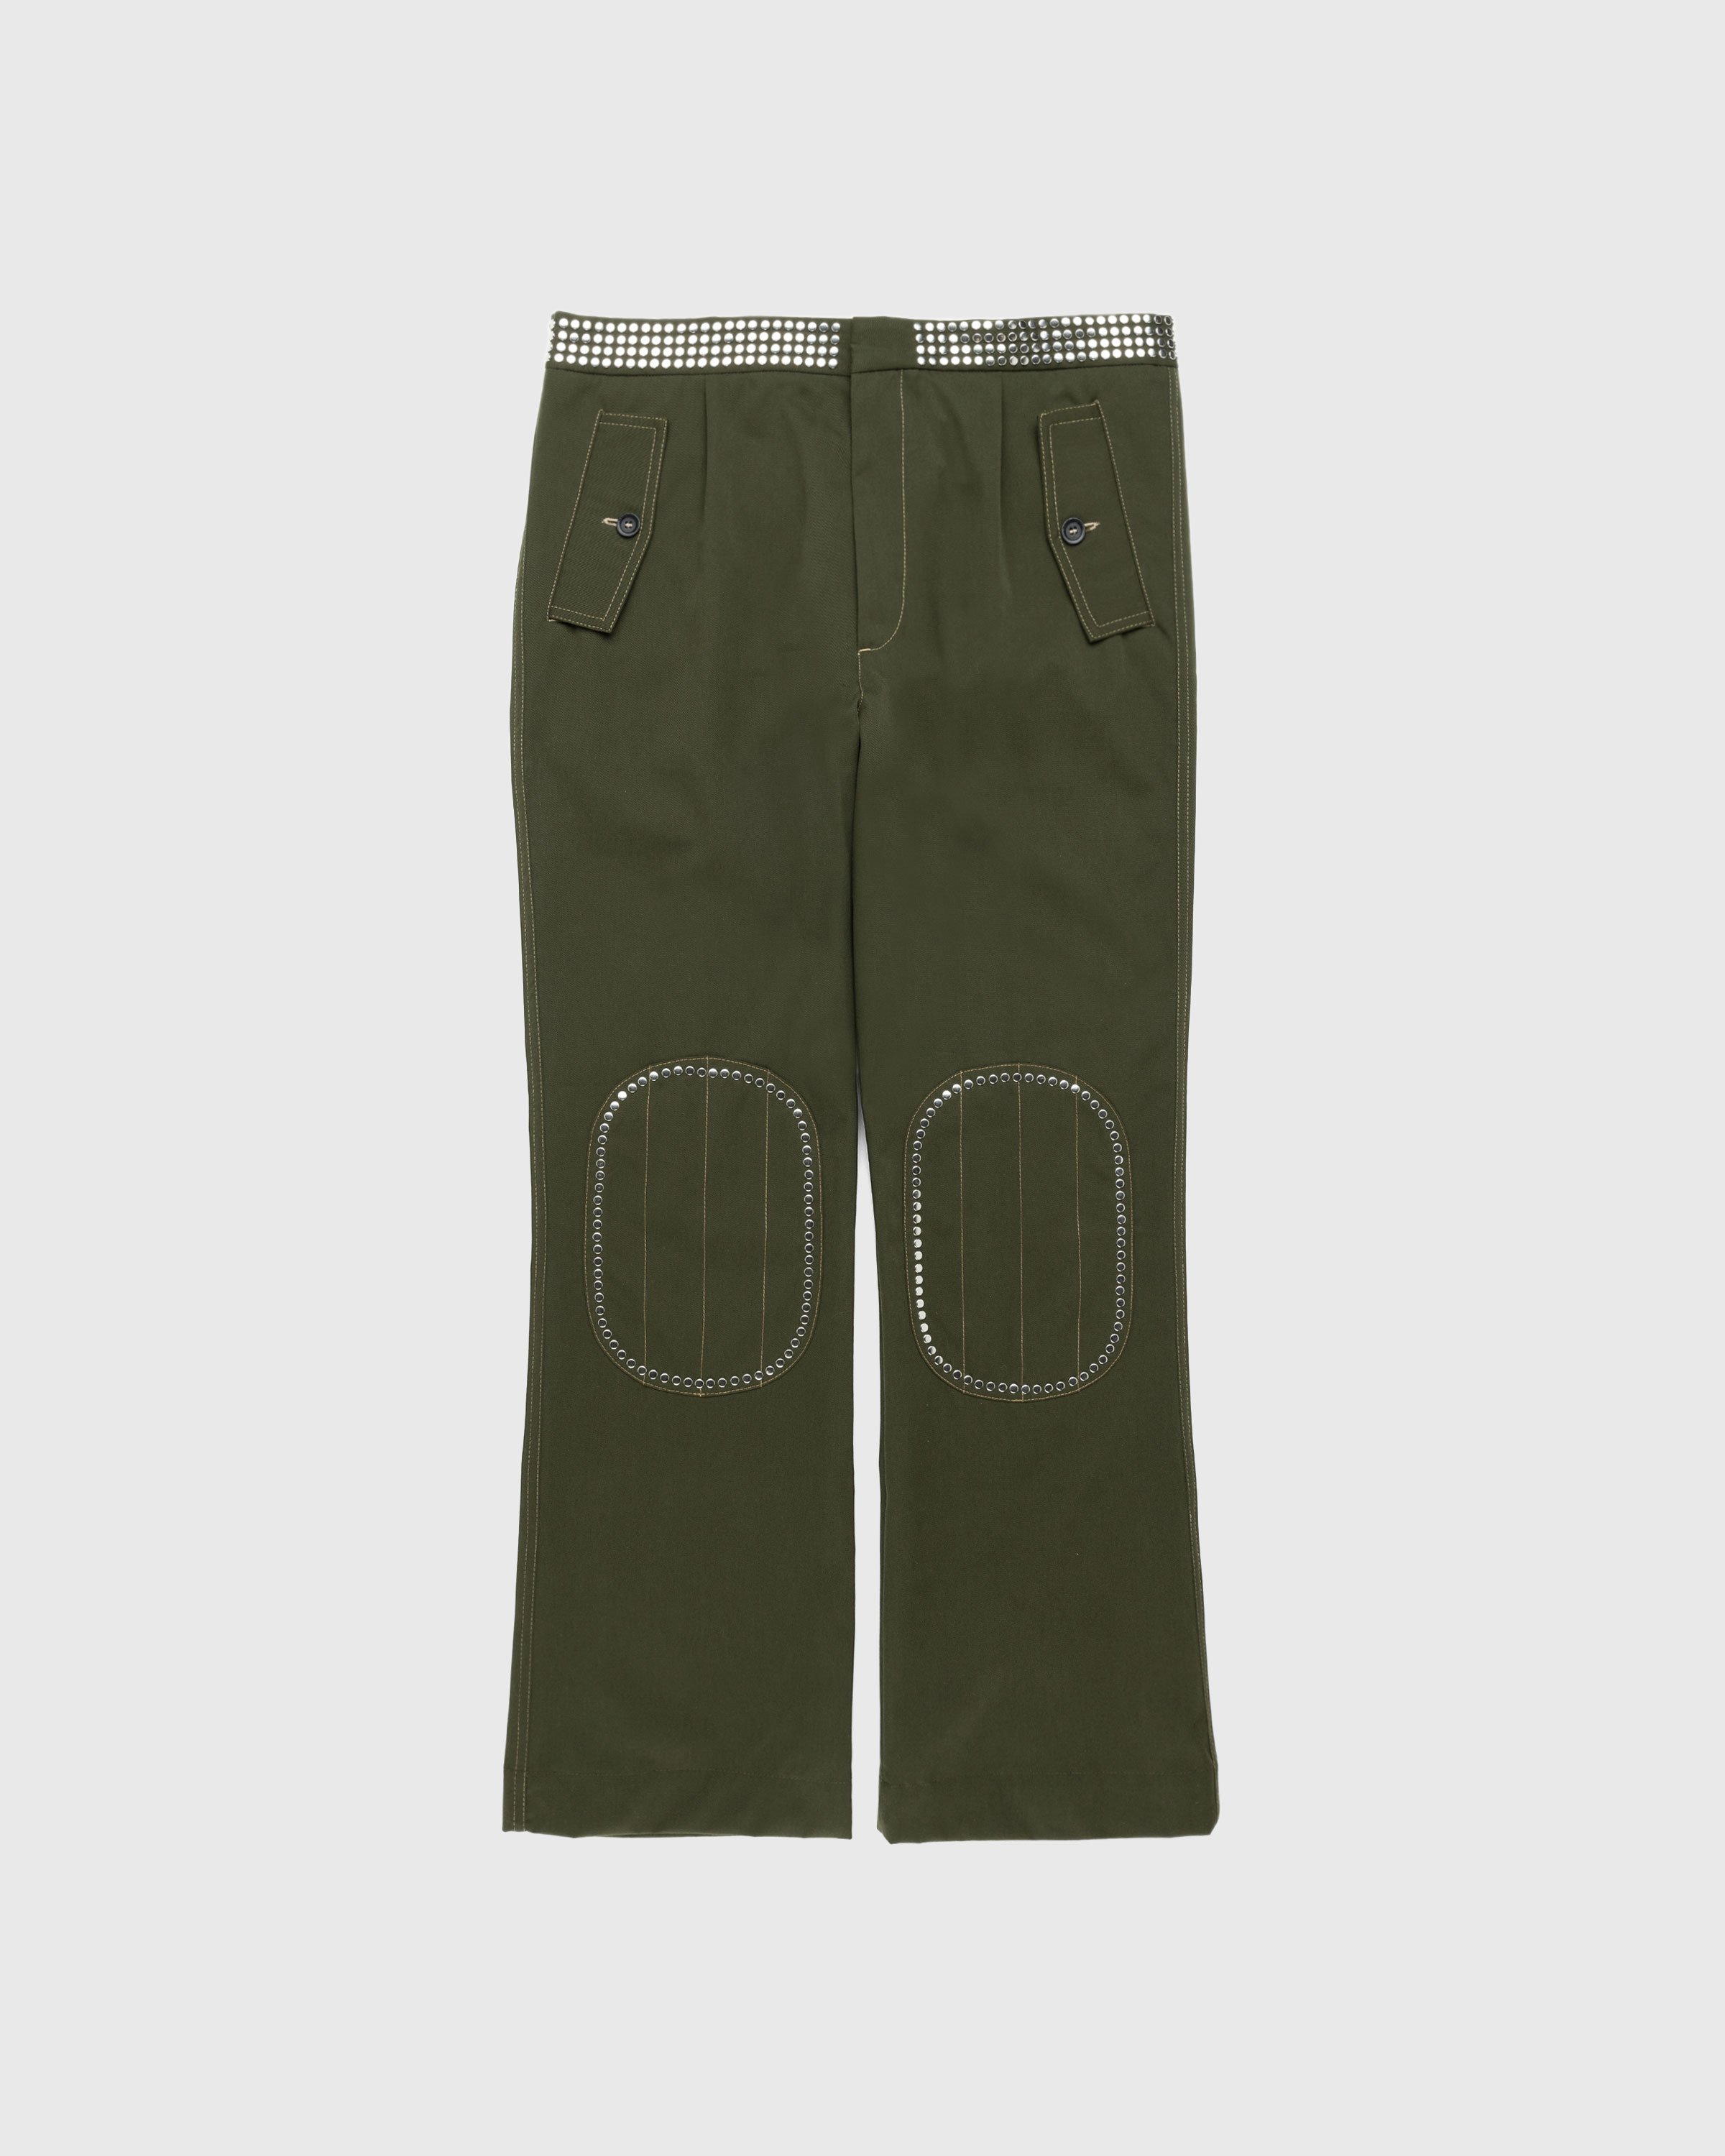 Wales Bonner - Tomorrow Trousers - Clothing - Green - Image 1